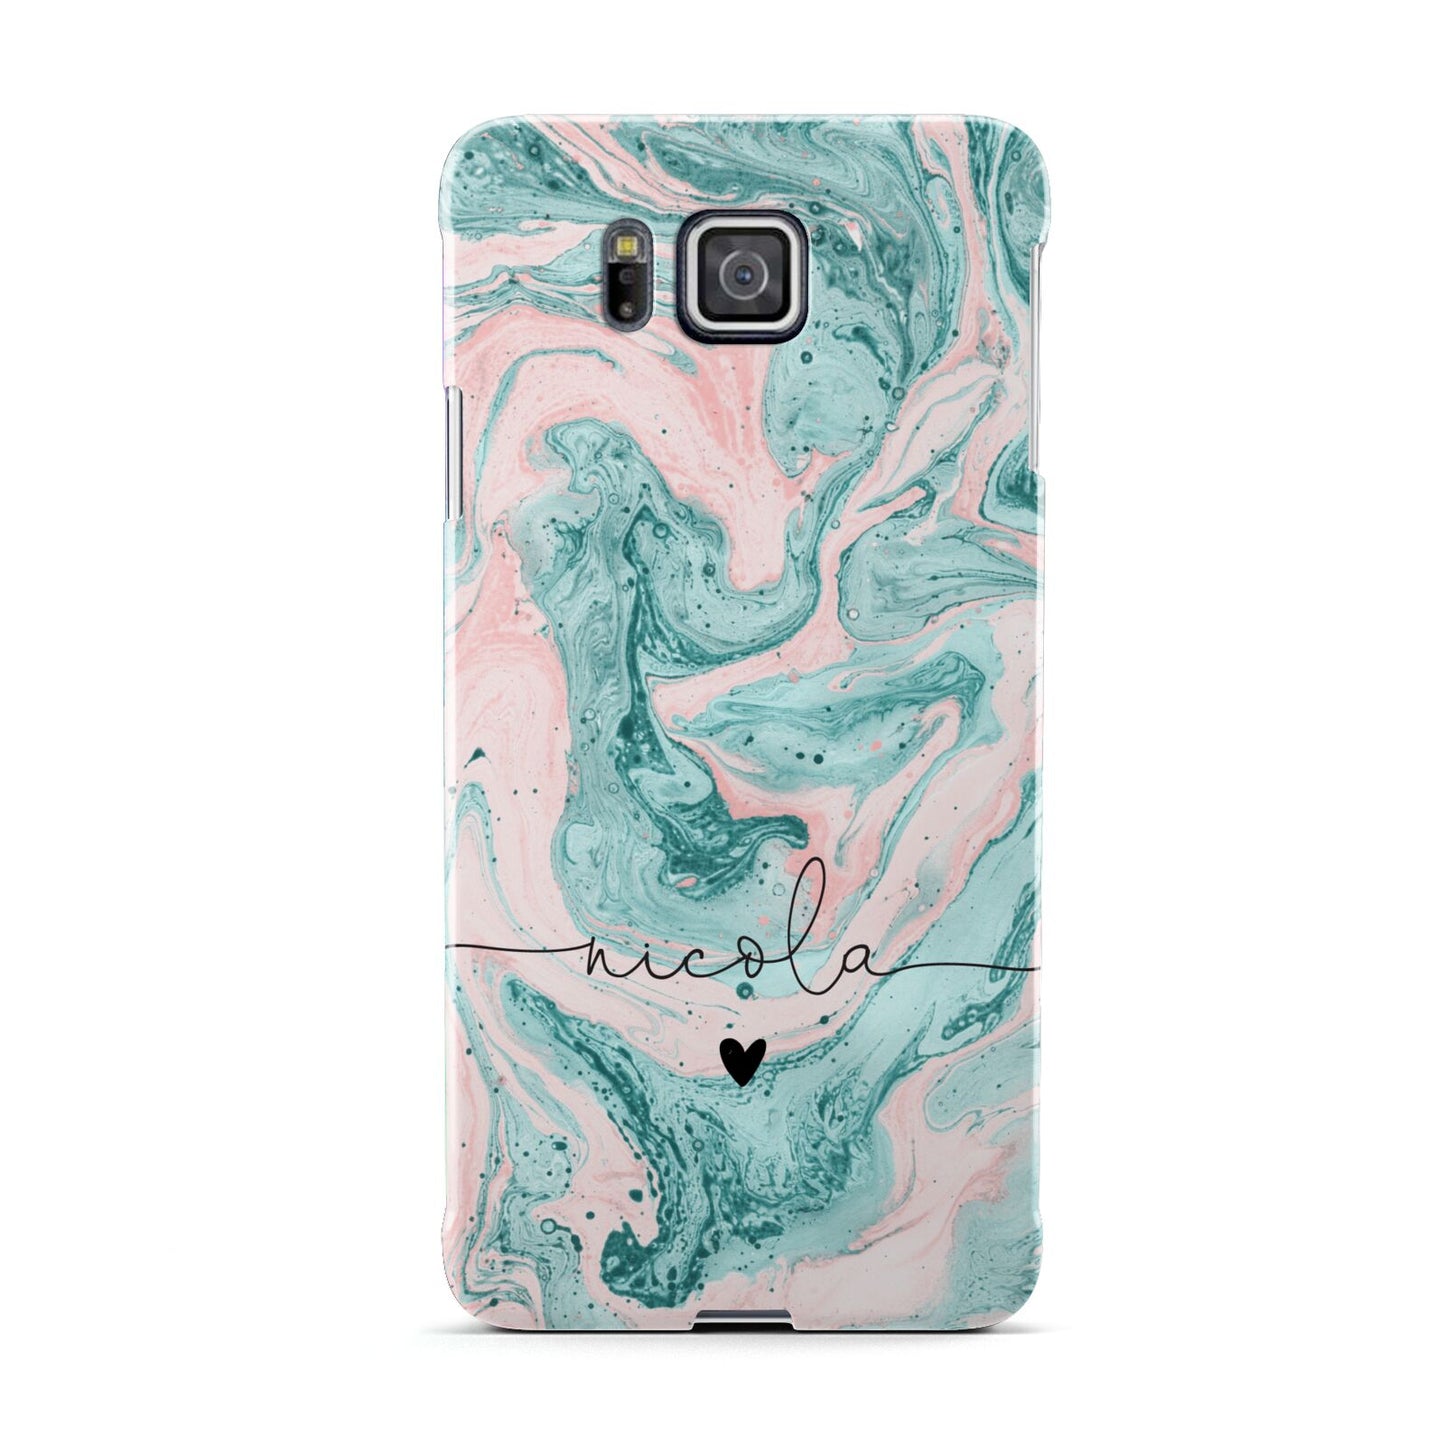 Personalised Name Green Swirl Marble Samsung Galaxy Alpha Case